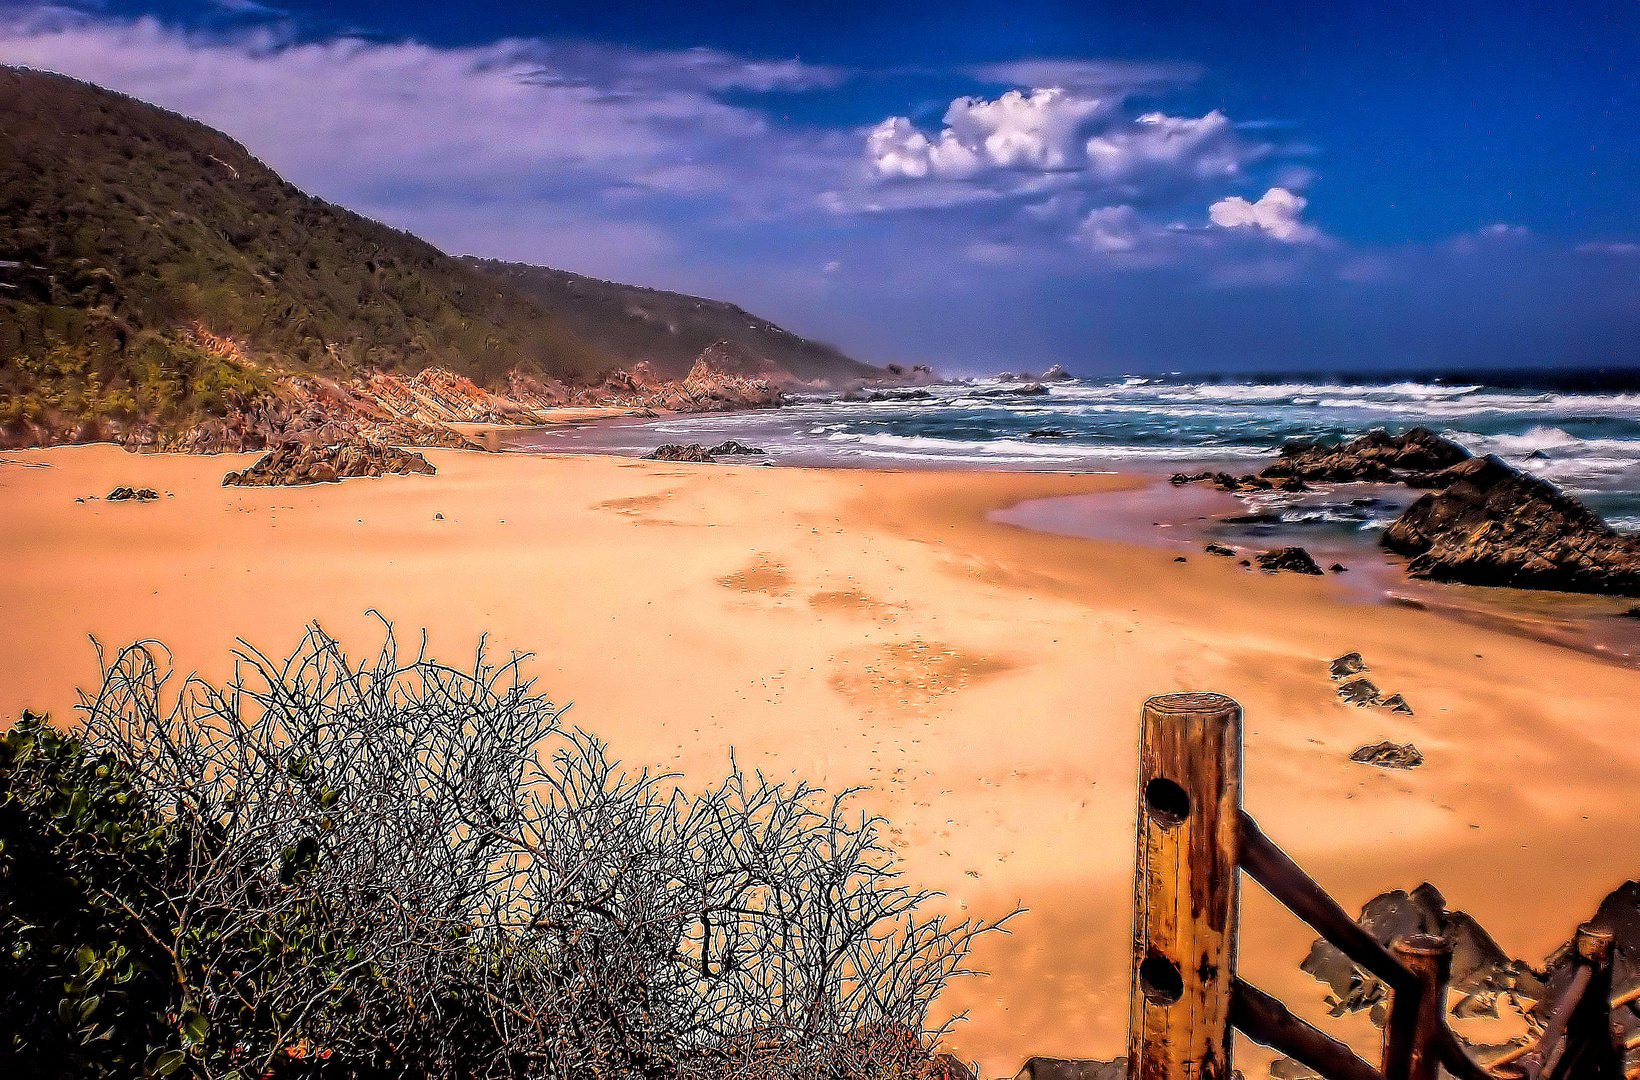 Keurboomstrand in South Africa